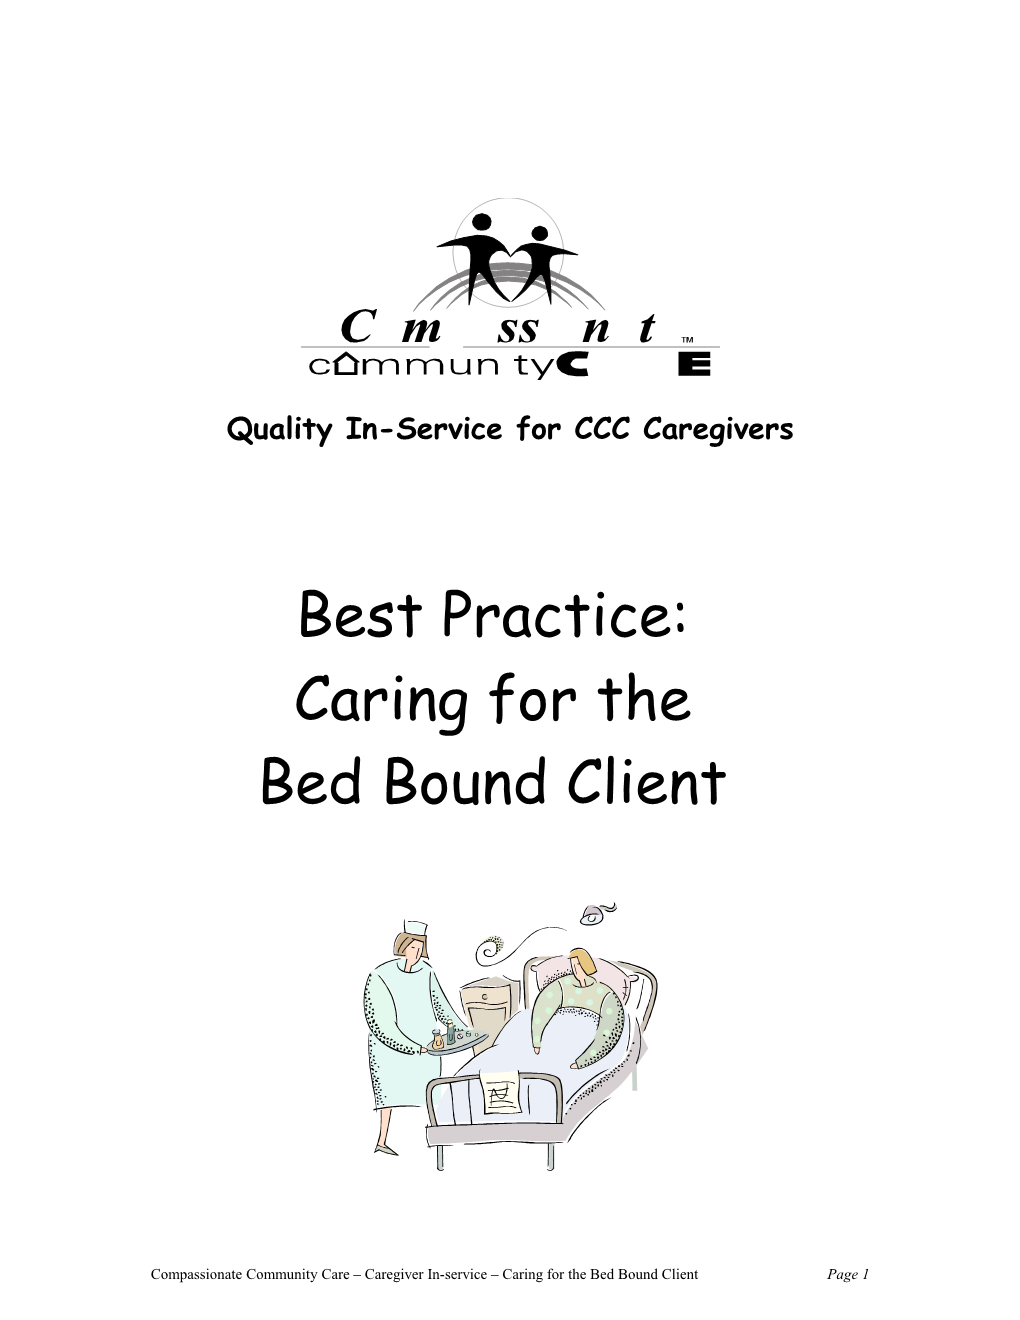 Quality In-Service for CCC Caregivers